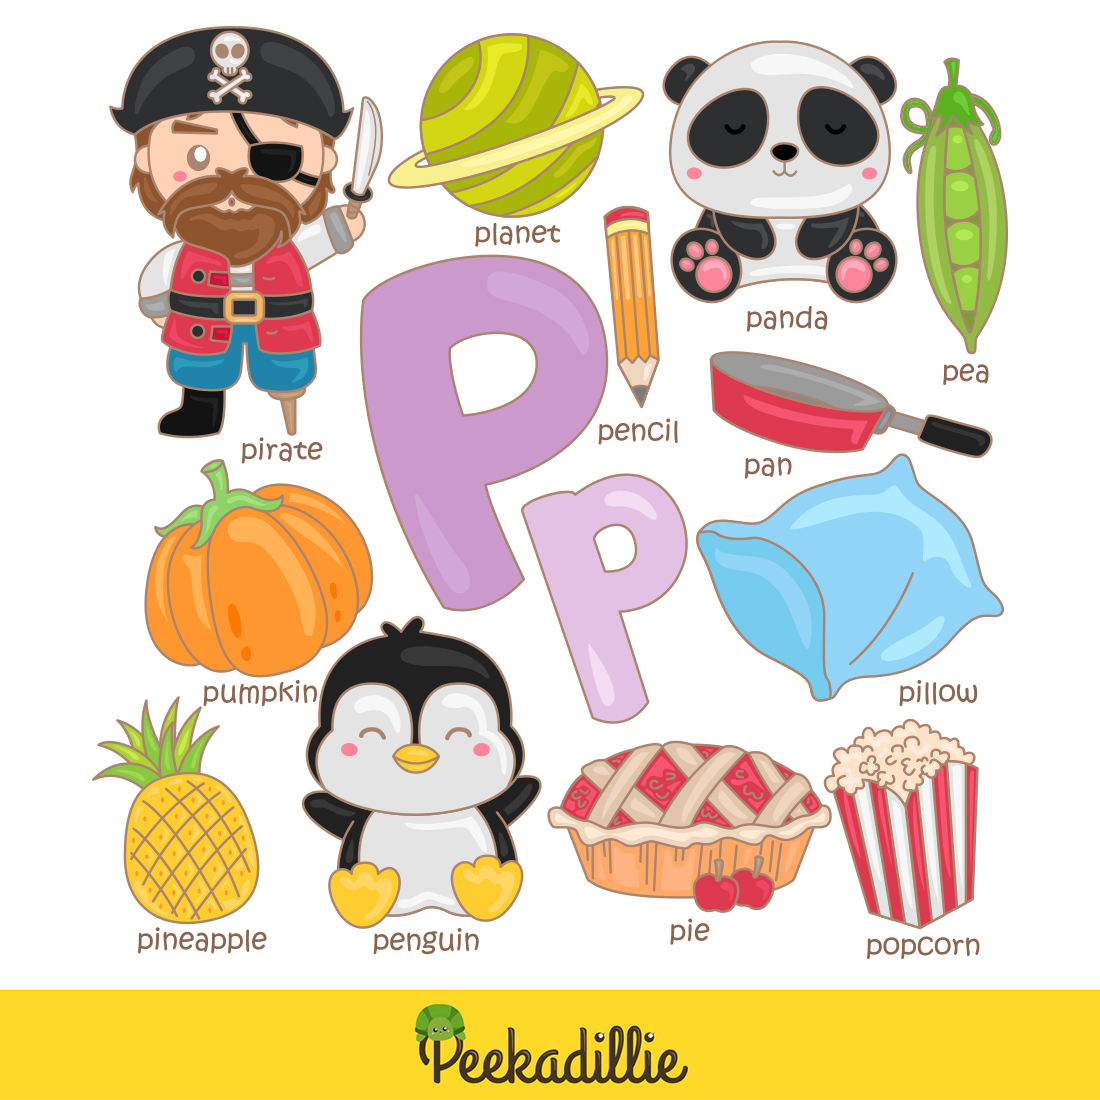 Alphabet P For Vocabulary School Letter Reading Writing Font Study Learning Student Toodler Kids Cartoon Pirate Planet Pumpkin Pineapple Penguin Pie Popcorn Pencil Pillow Panda Pea Pan Illustration Vector Clipart preview image.